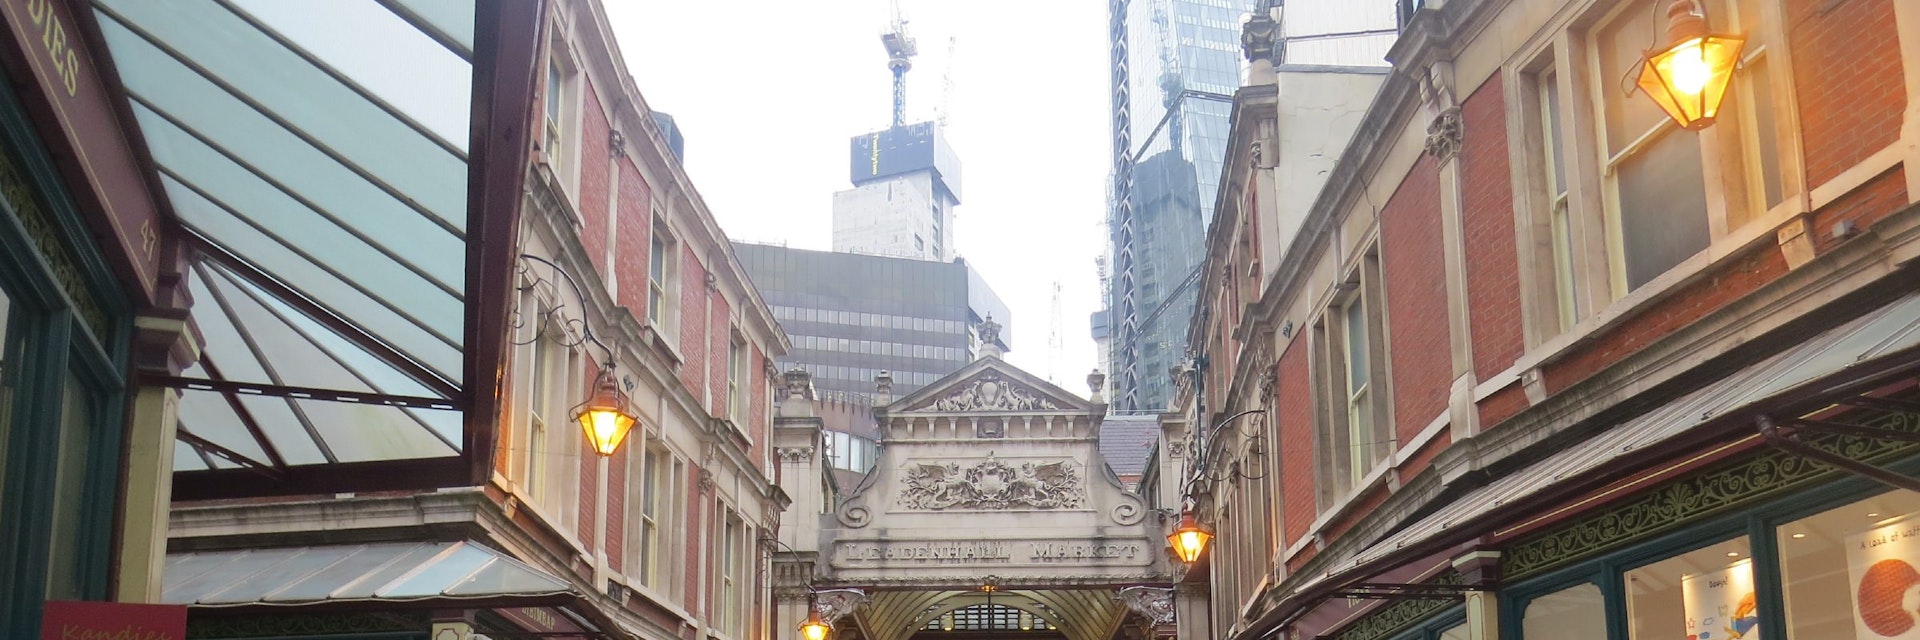 Inside Leadenhall Market in the heart of the City of London